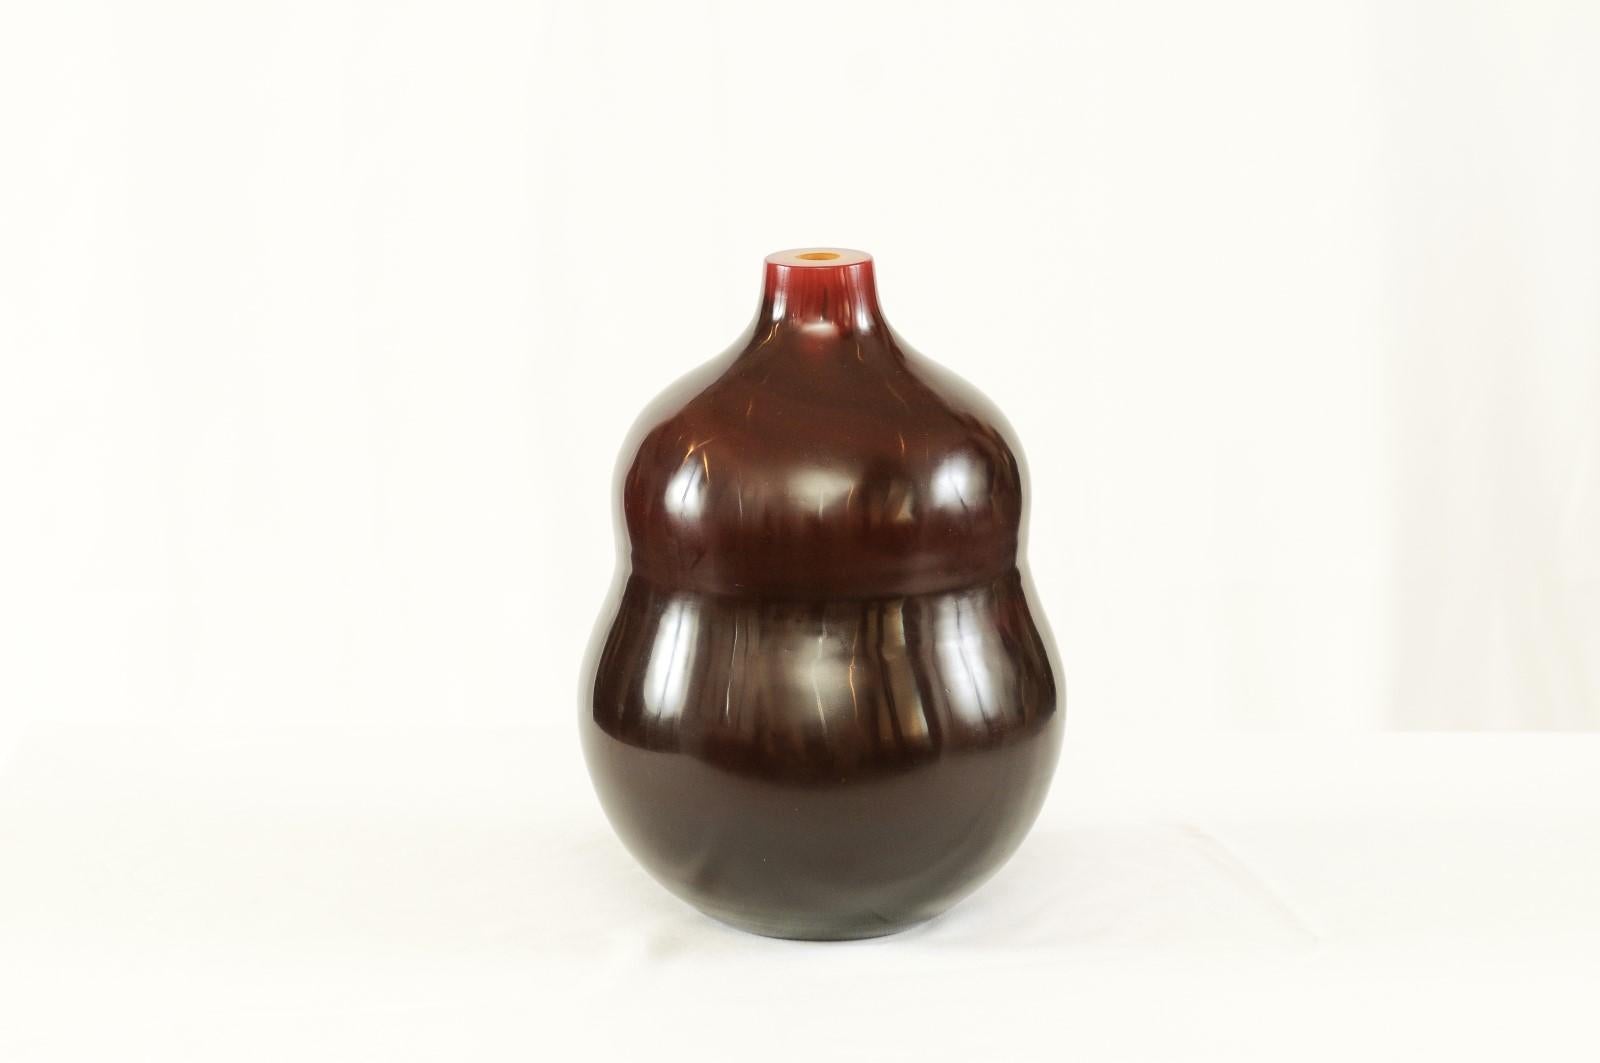 A beautiful Peking glass vase by Robert KuoHandcrafted in the 400-year-old technique of Peking glass, this Robert Kuo vase is masterfully mouth-blown from layer upon layer of glass, then shaped and polished by hand. Though its lineage is deeply